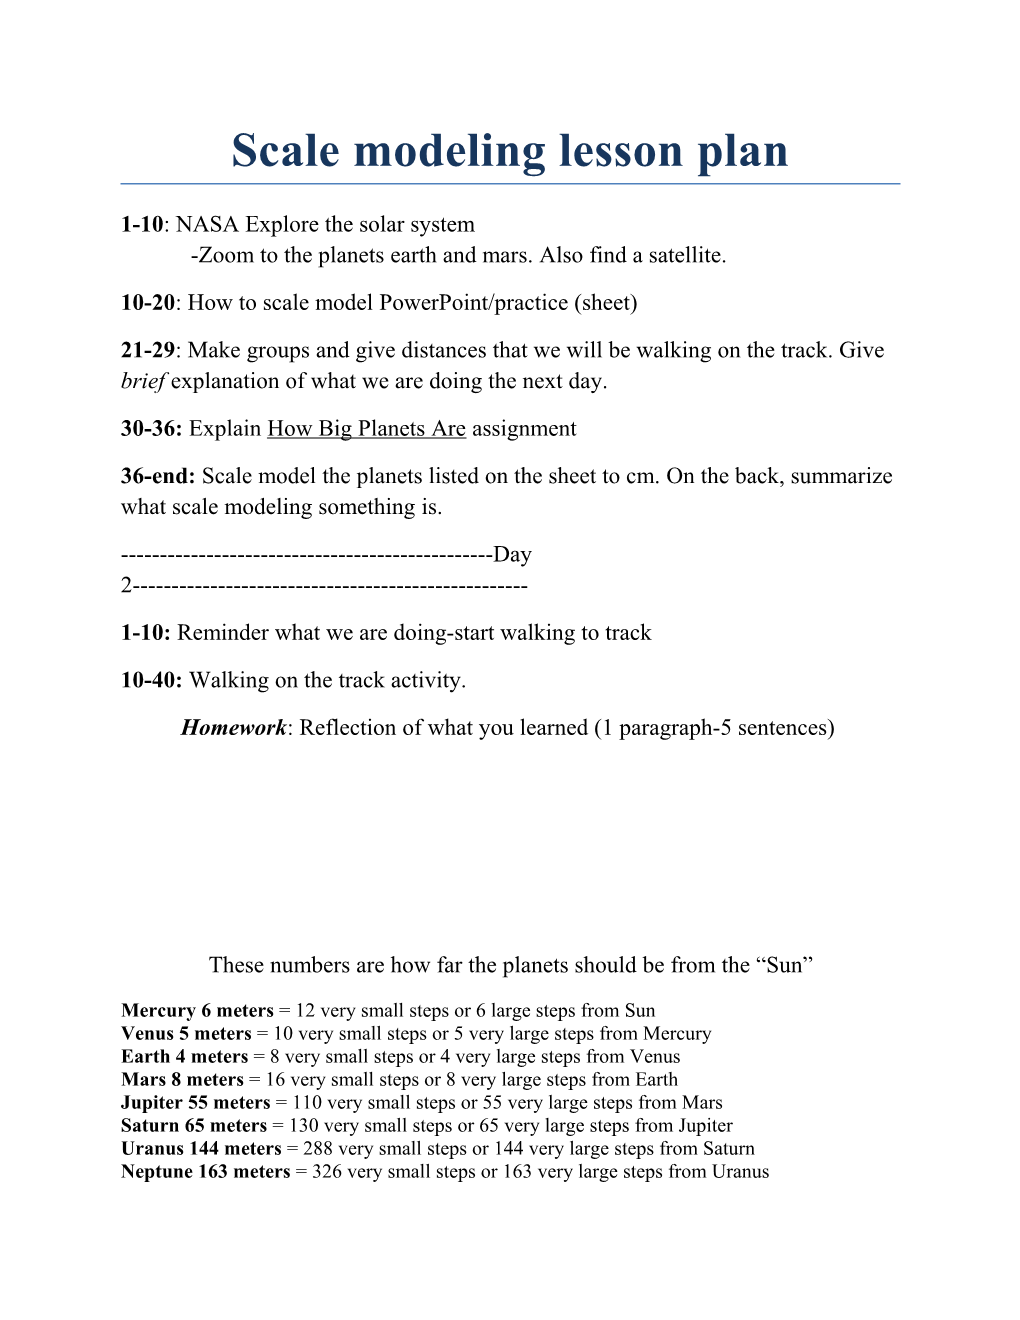 Scale Modeling Lesson Plan